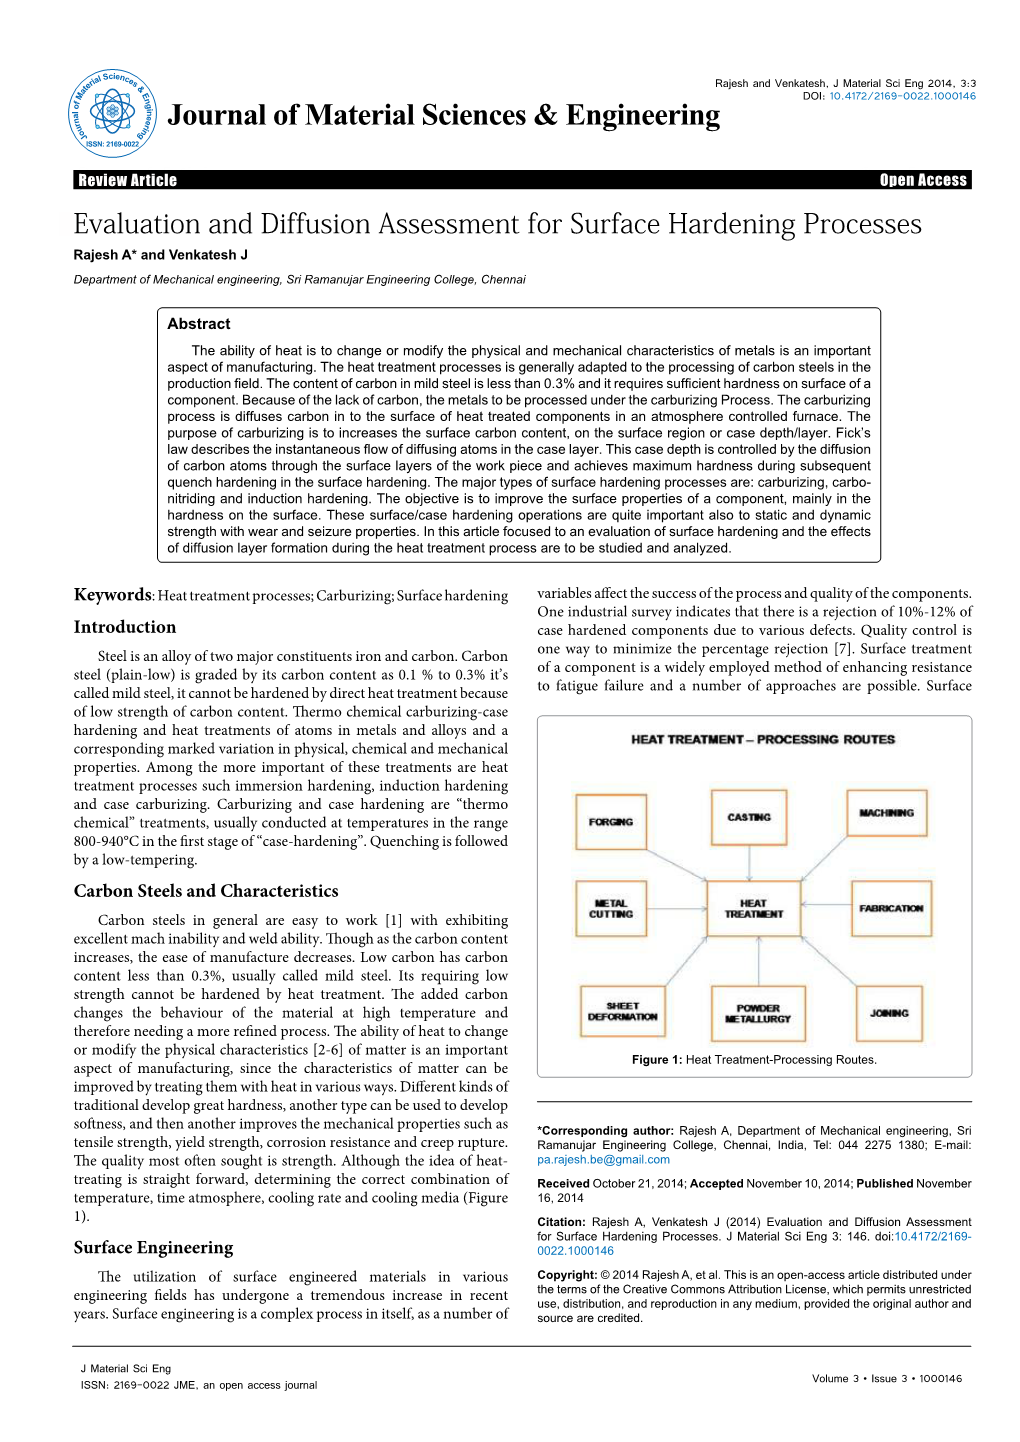 Evaluation and Diffusion Assessment for Surface Hardening Processes